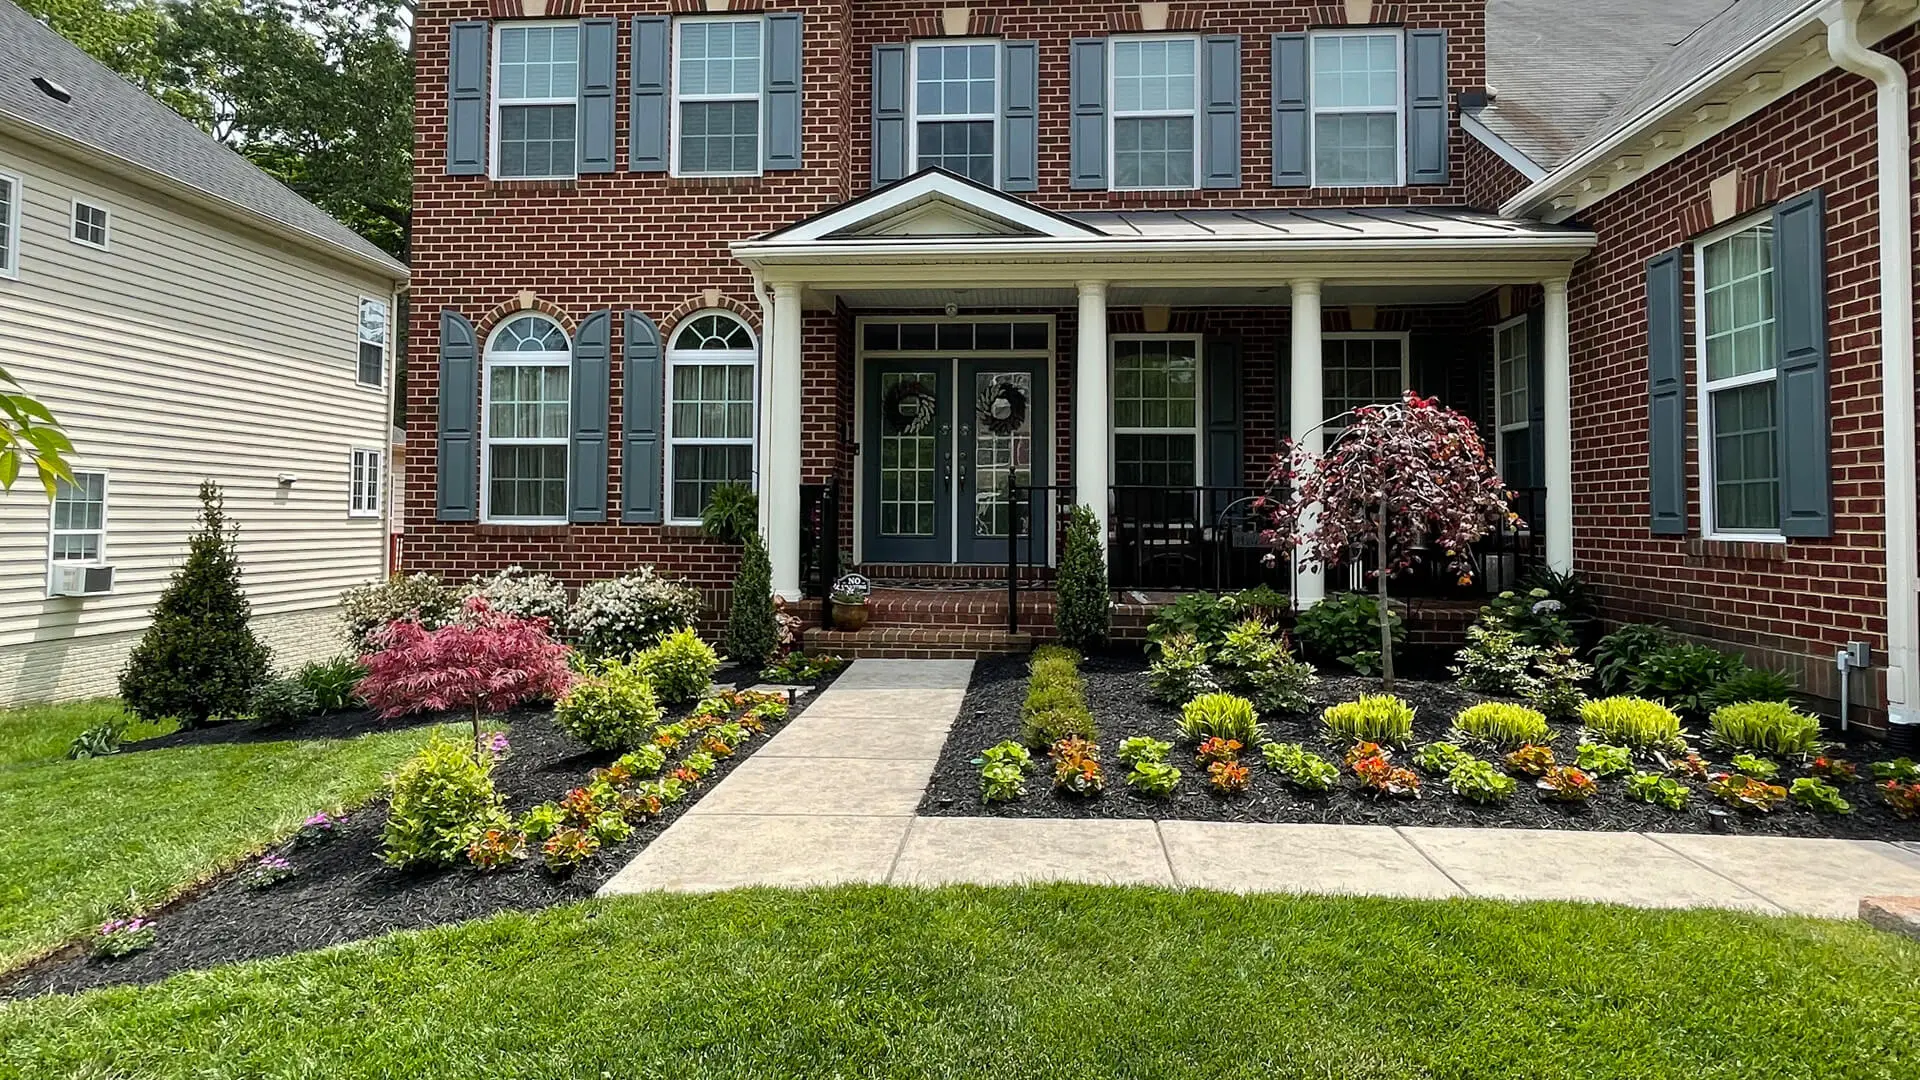 Landscape beds with colorful plants in front of a home in Bristow, VA.